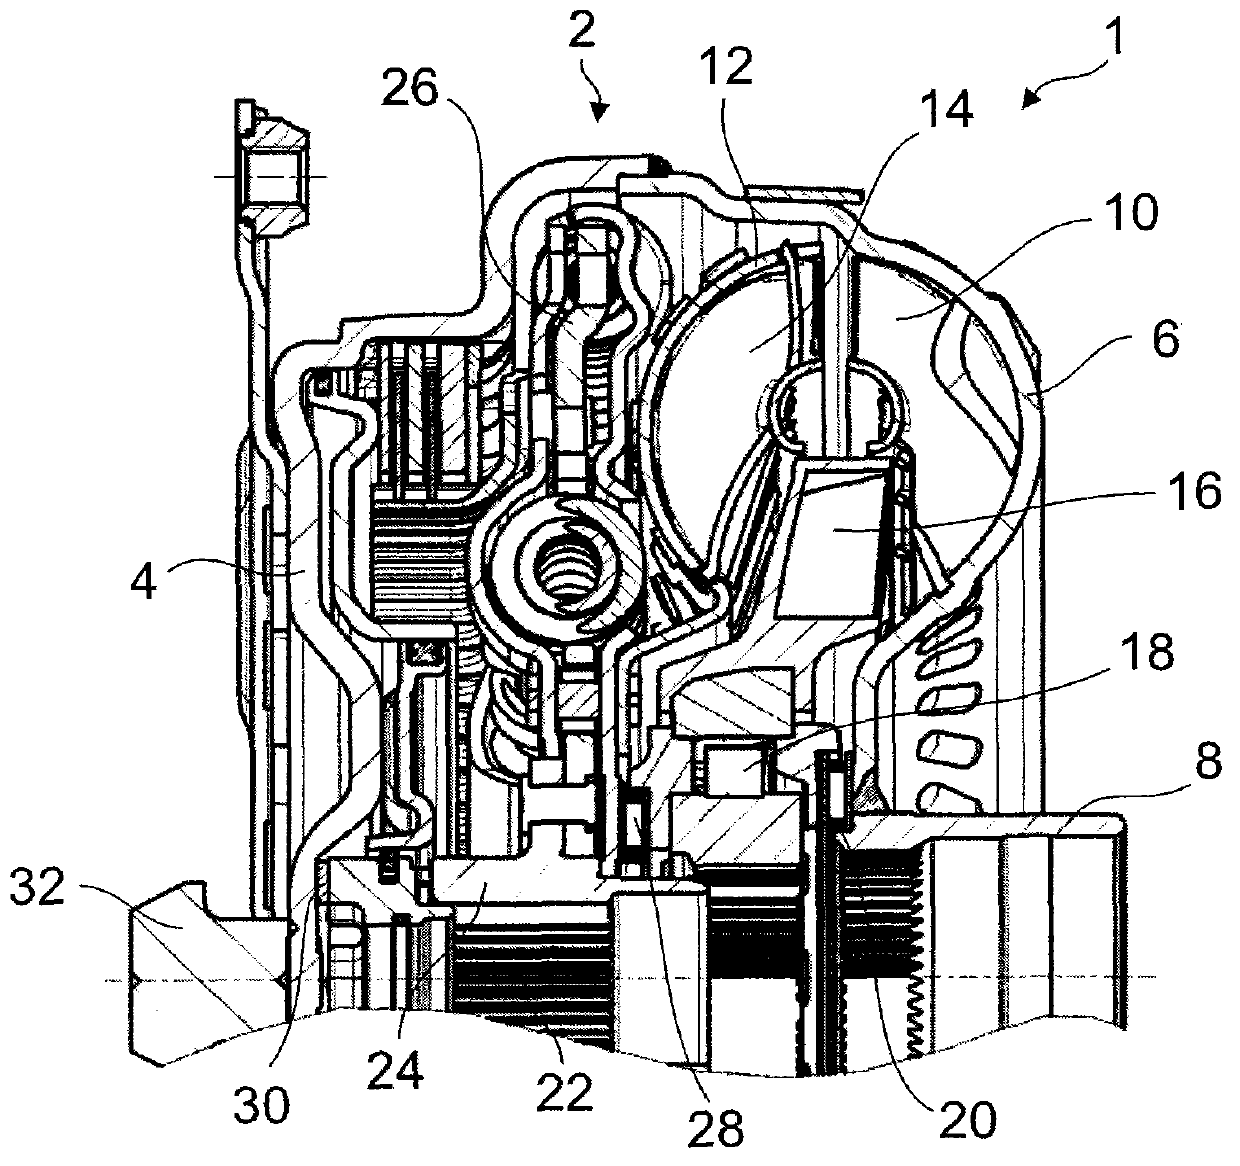 Torque transmission device with electrical insulation